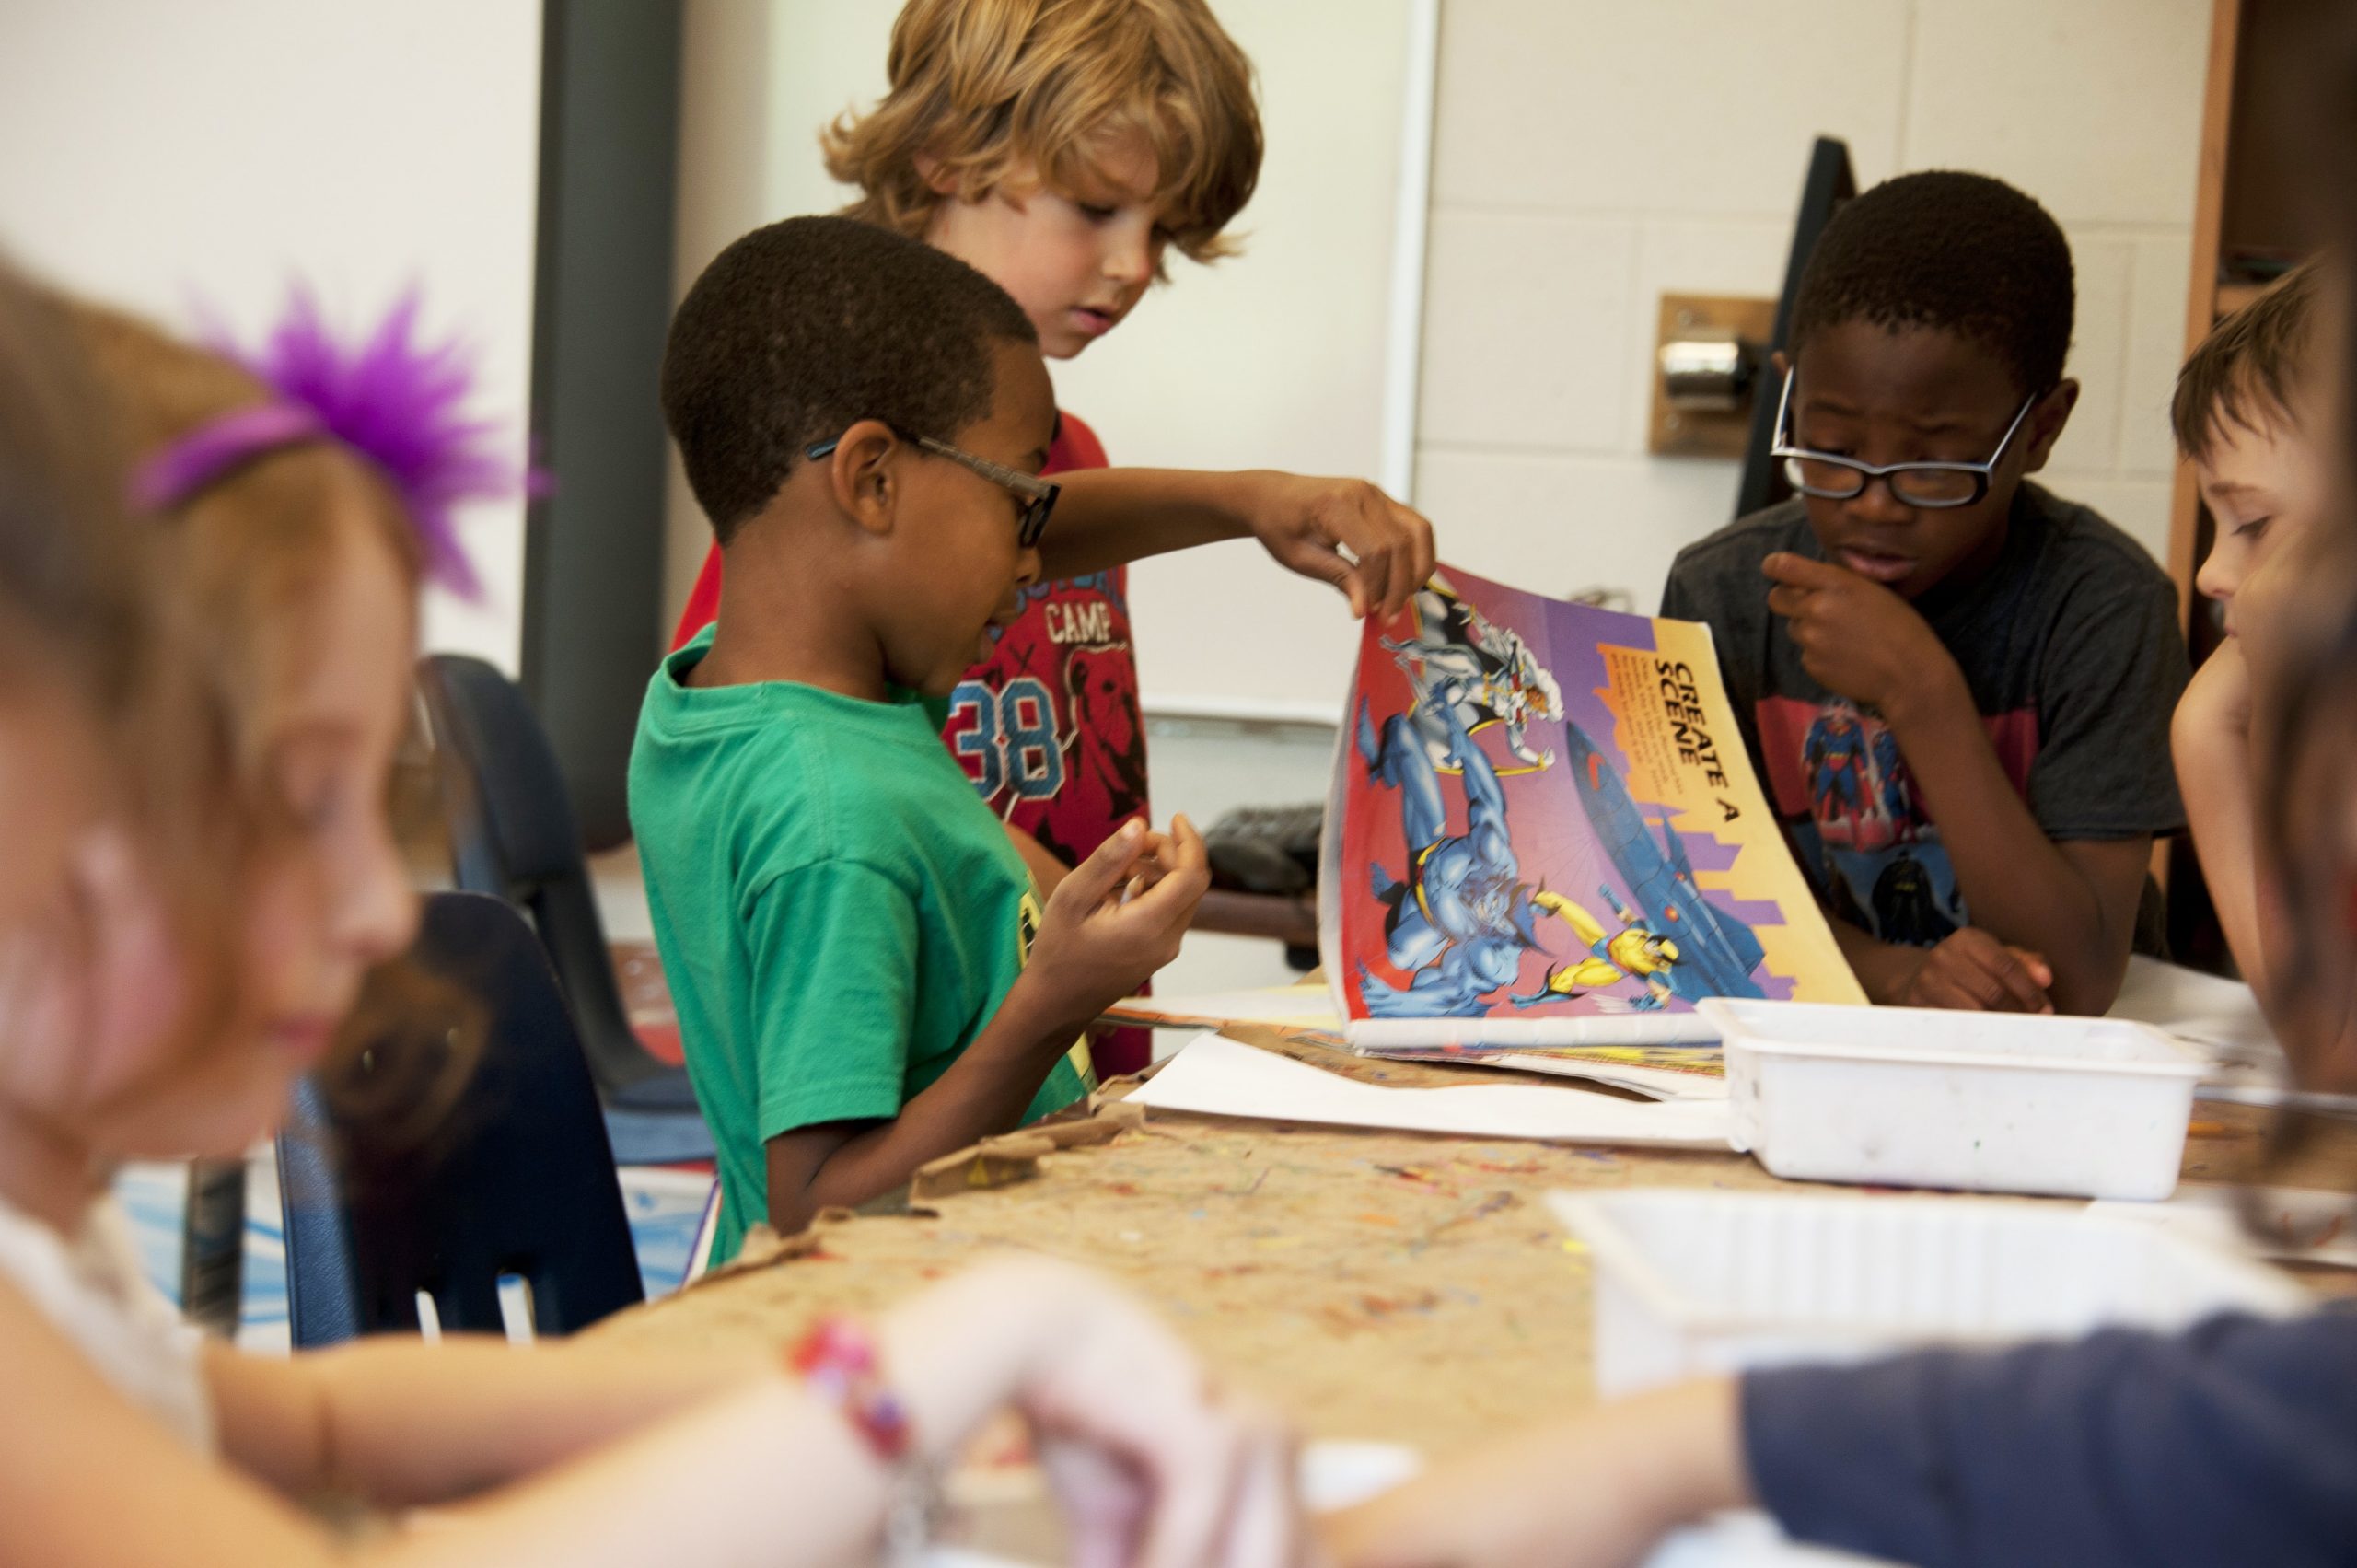 in an article about Tennessee schools, a photo of children in a classroom